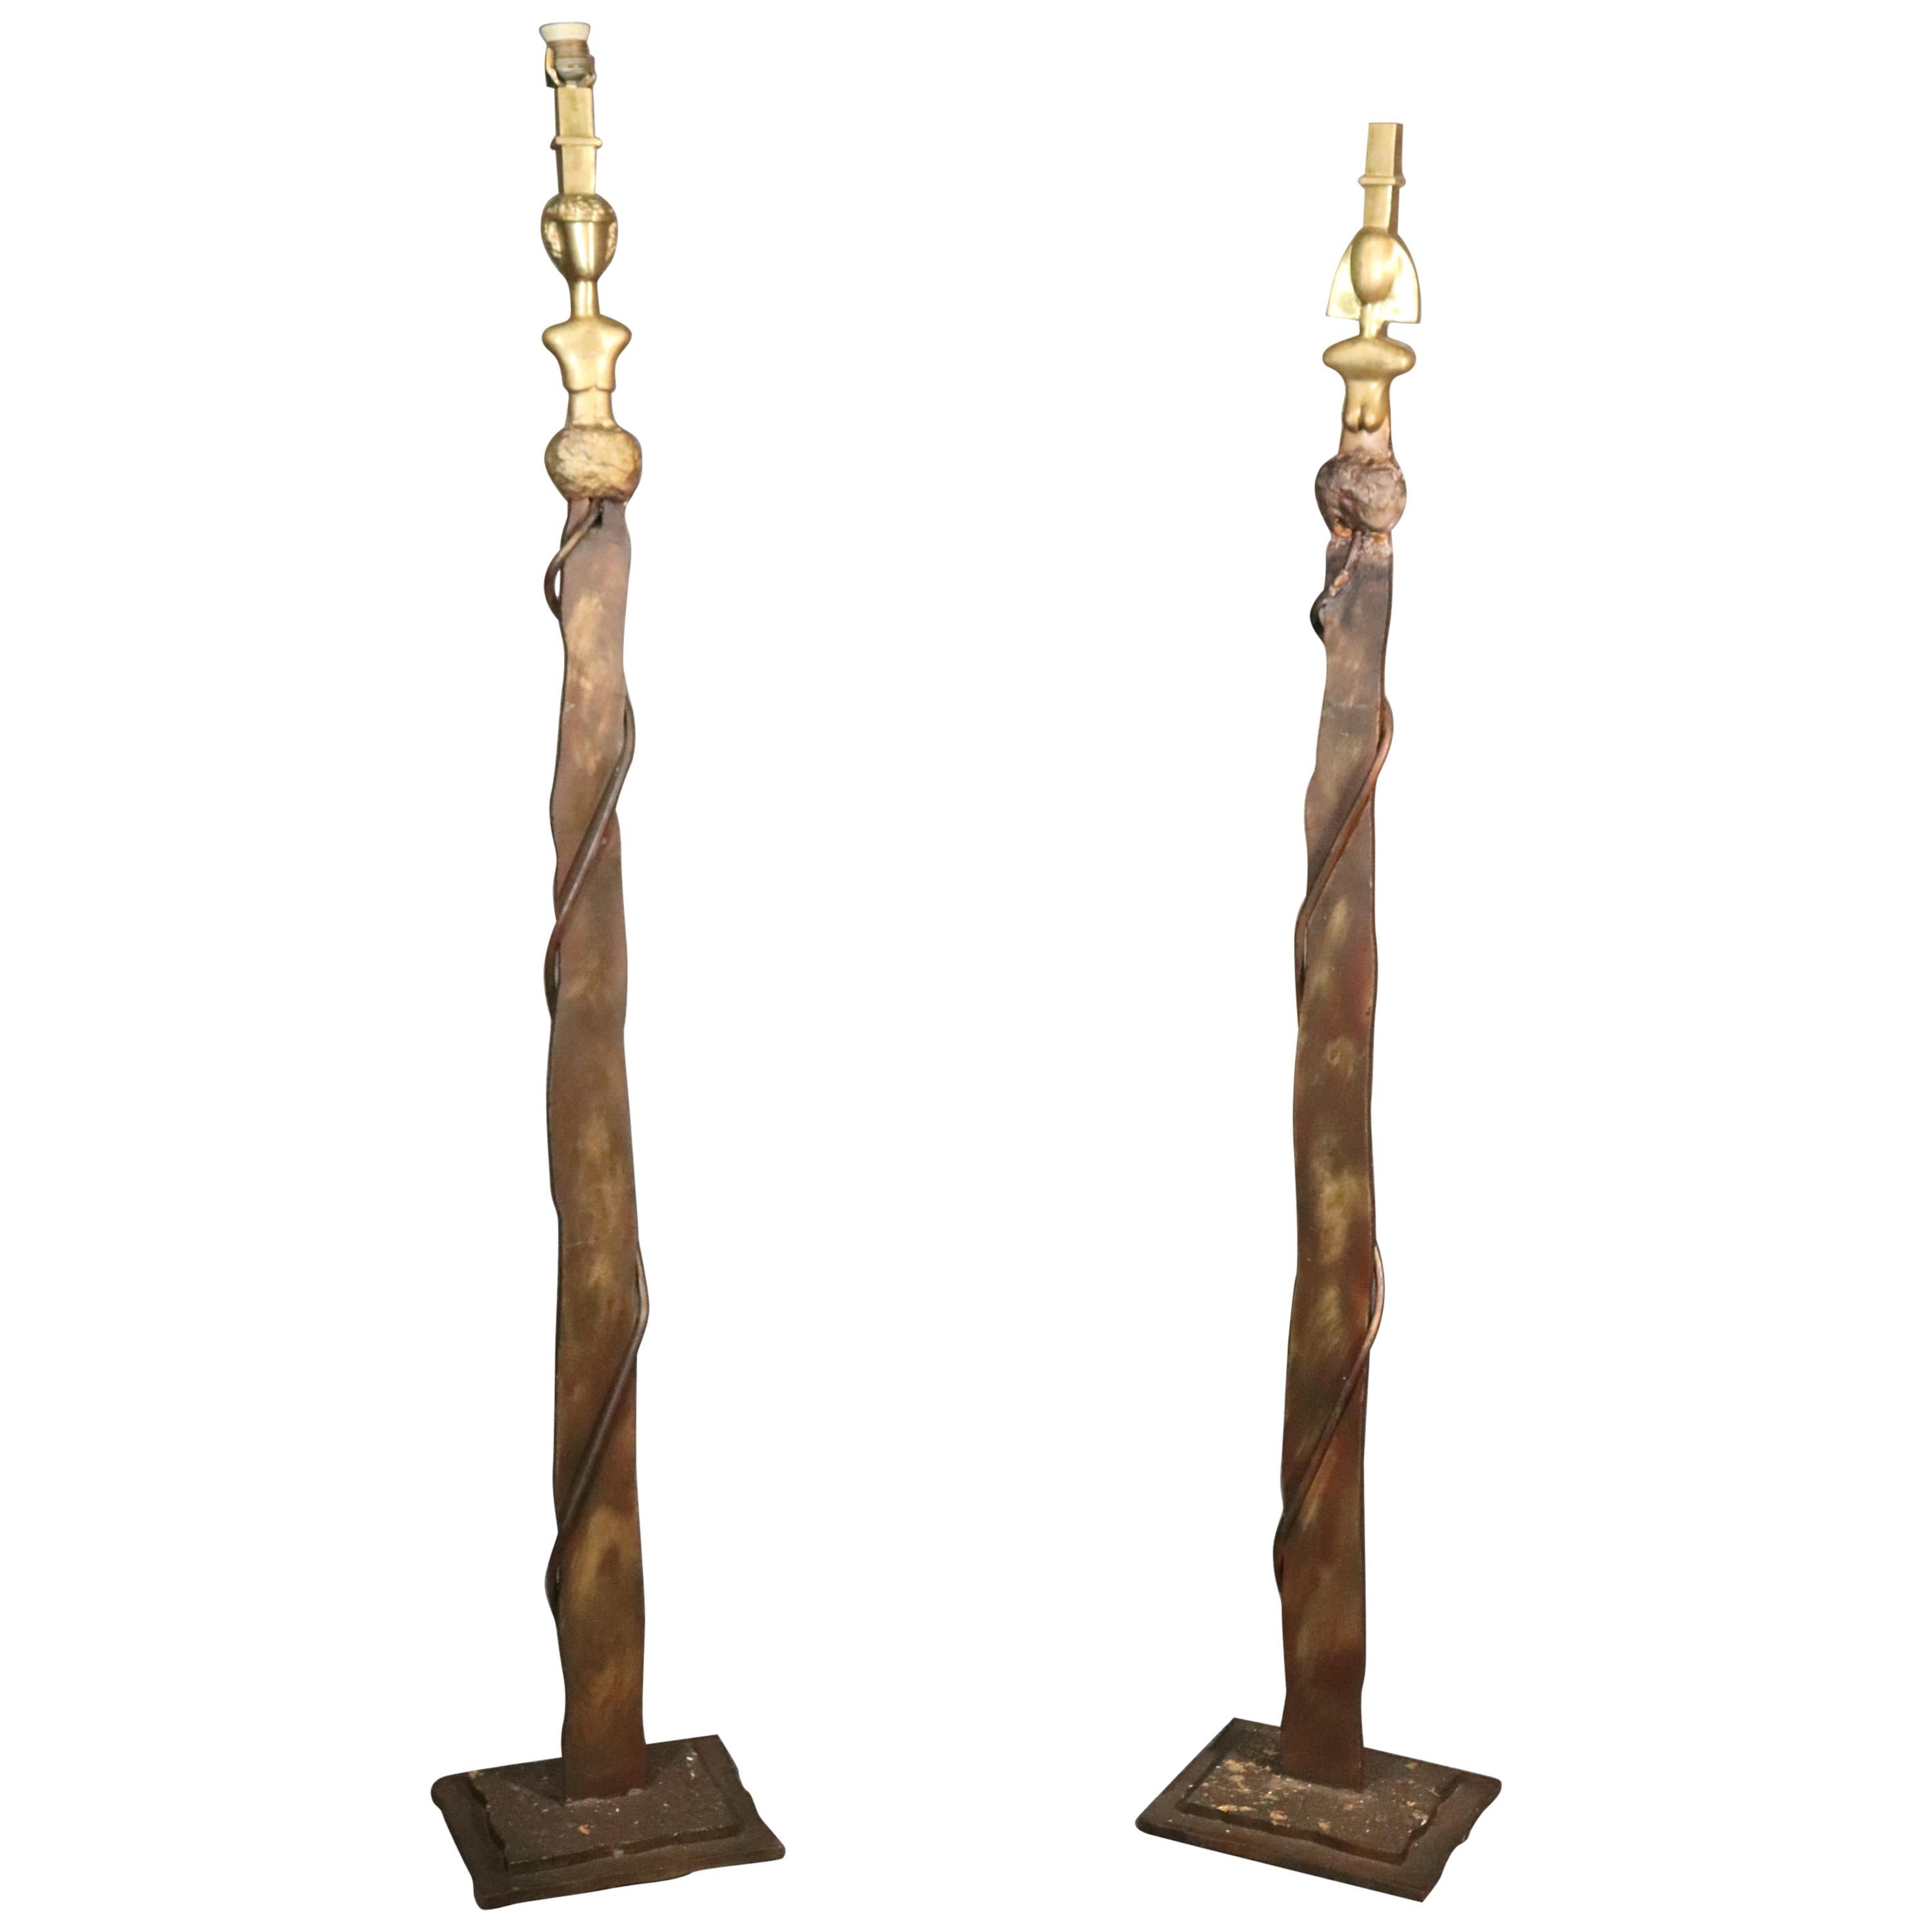 Pair of Solid Bronze and Iron Man and Woman Figurative Studio Art Floorlamps